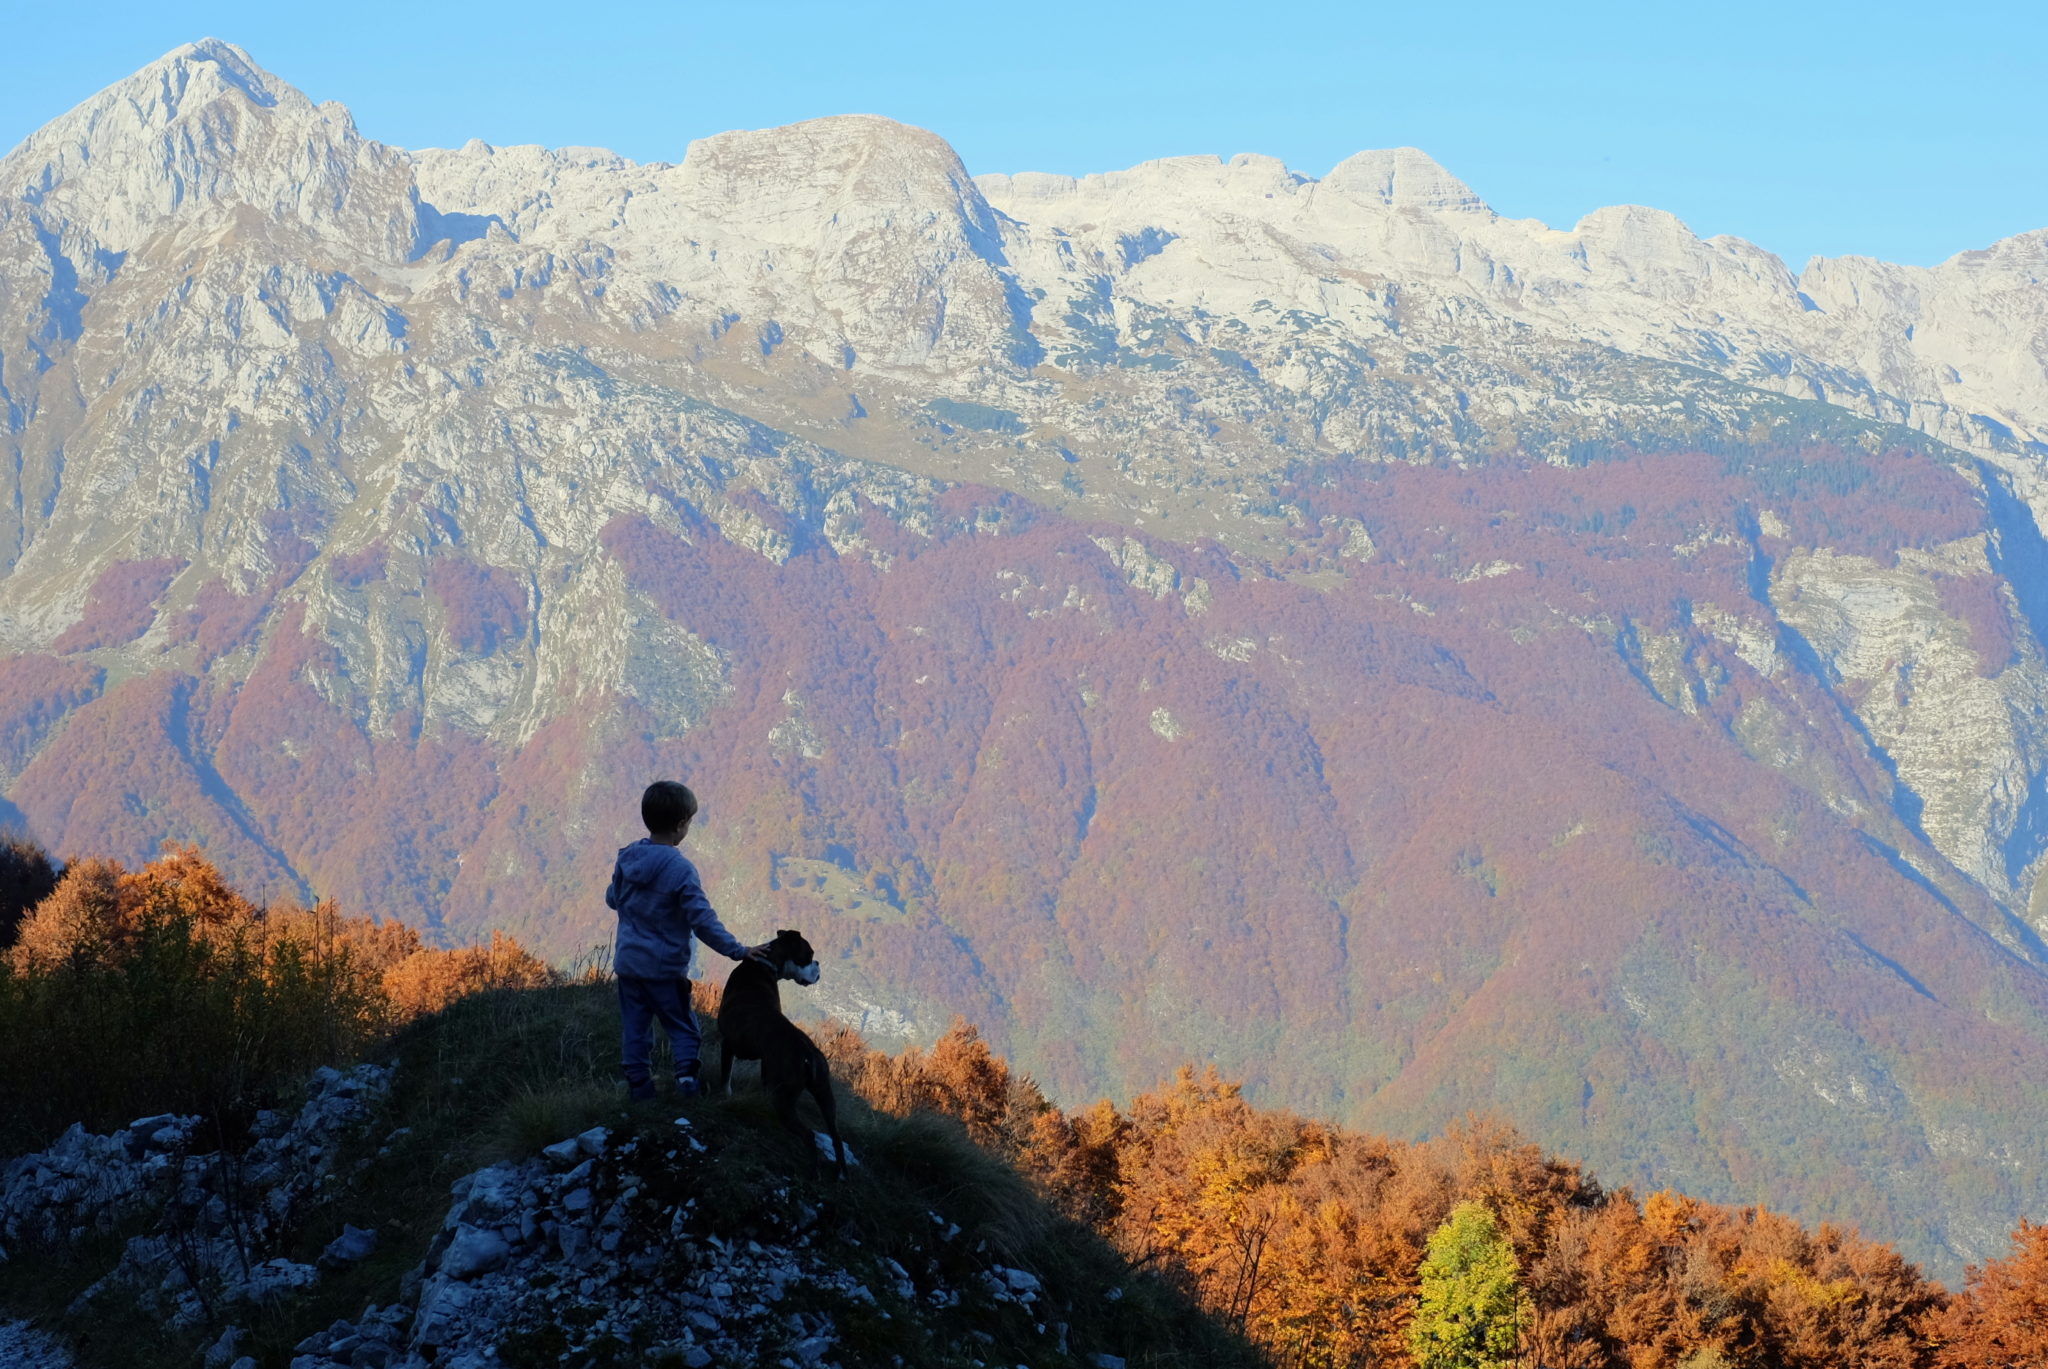 A boy and a dog in the mountains, Slovenia